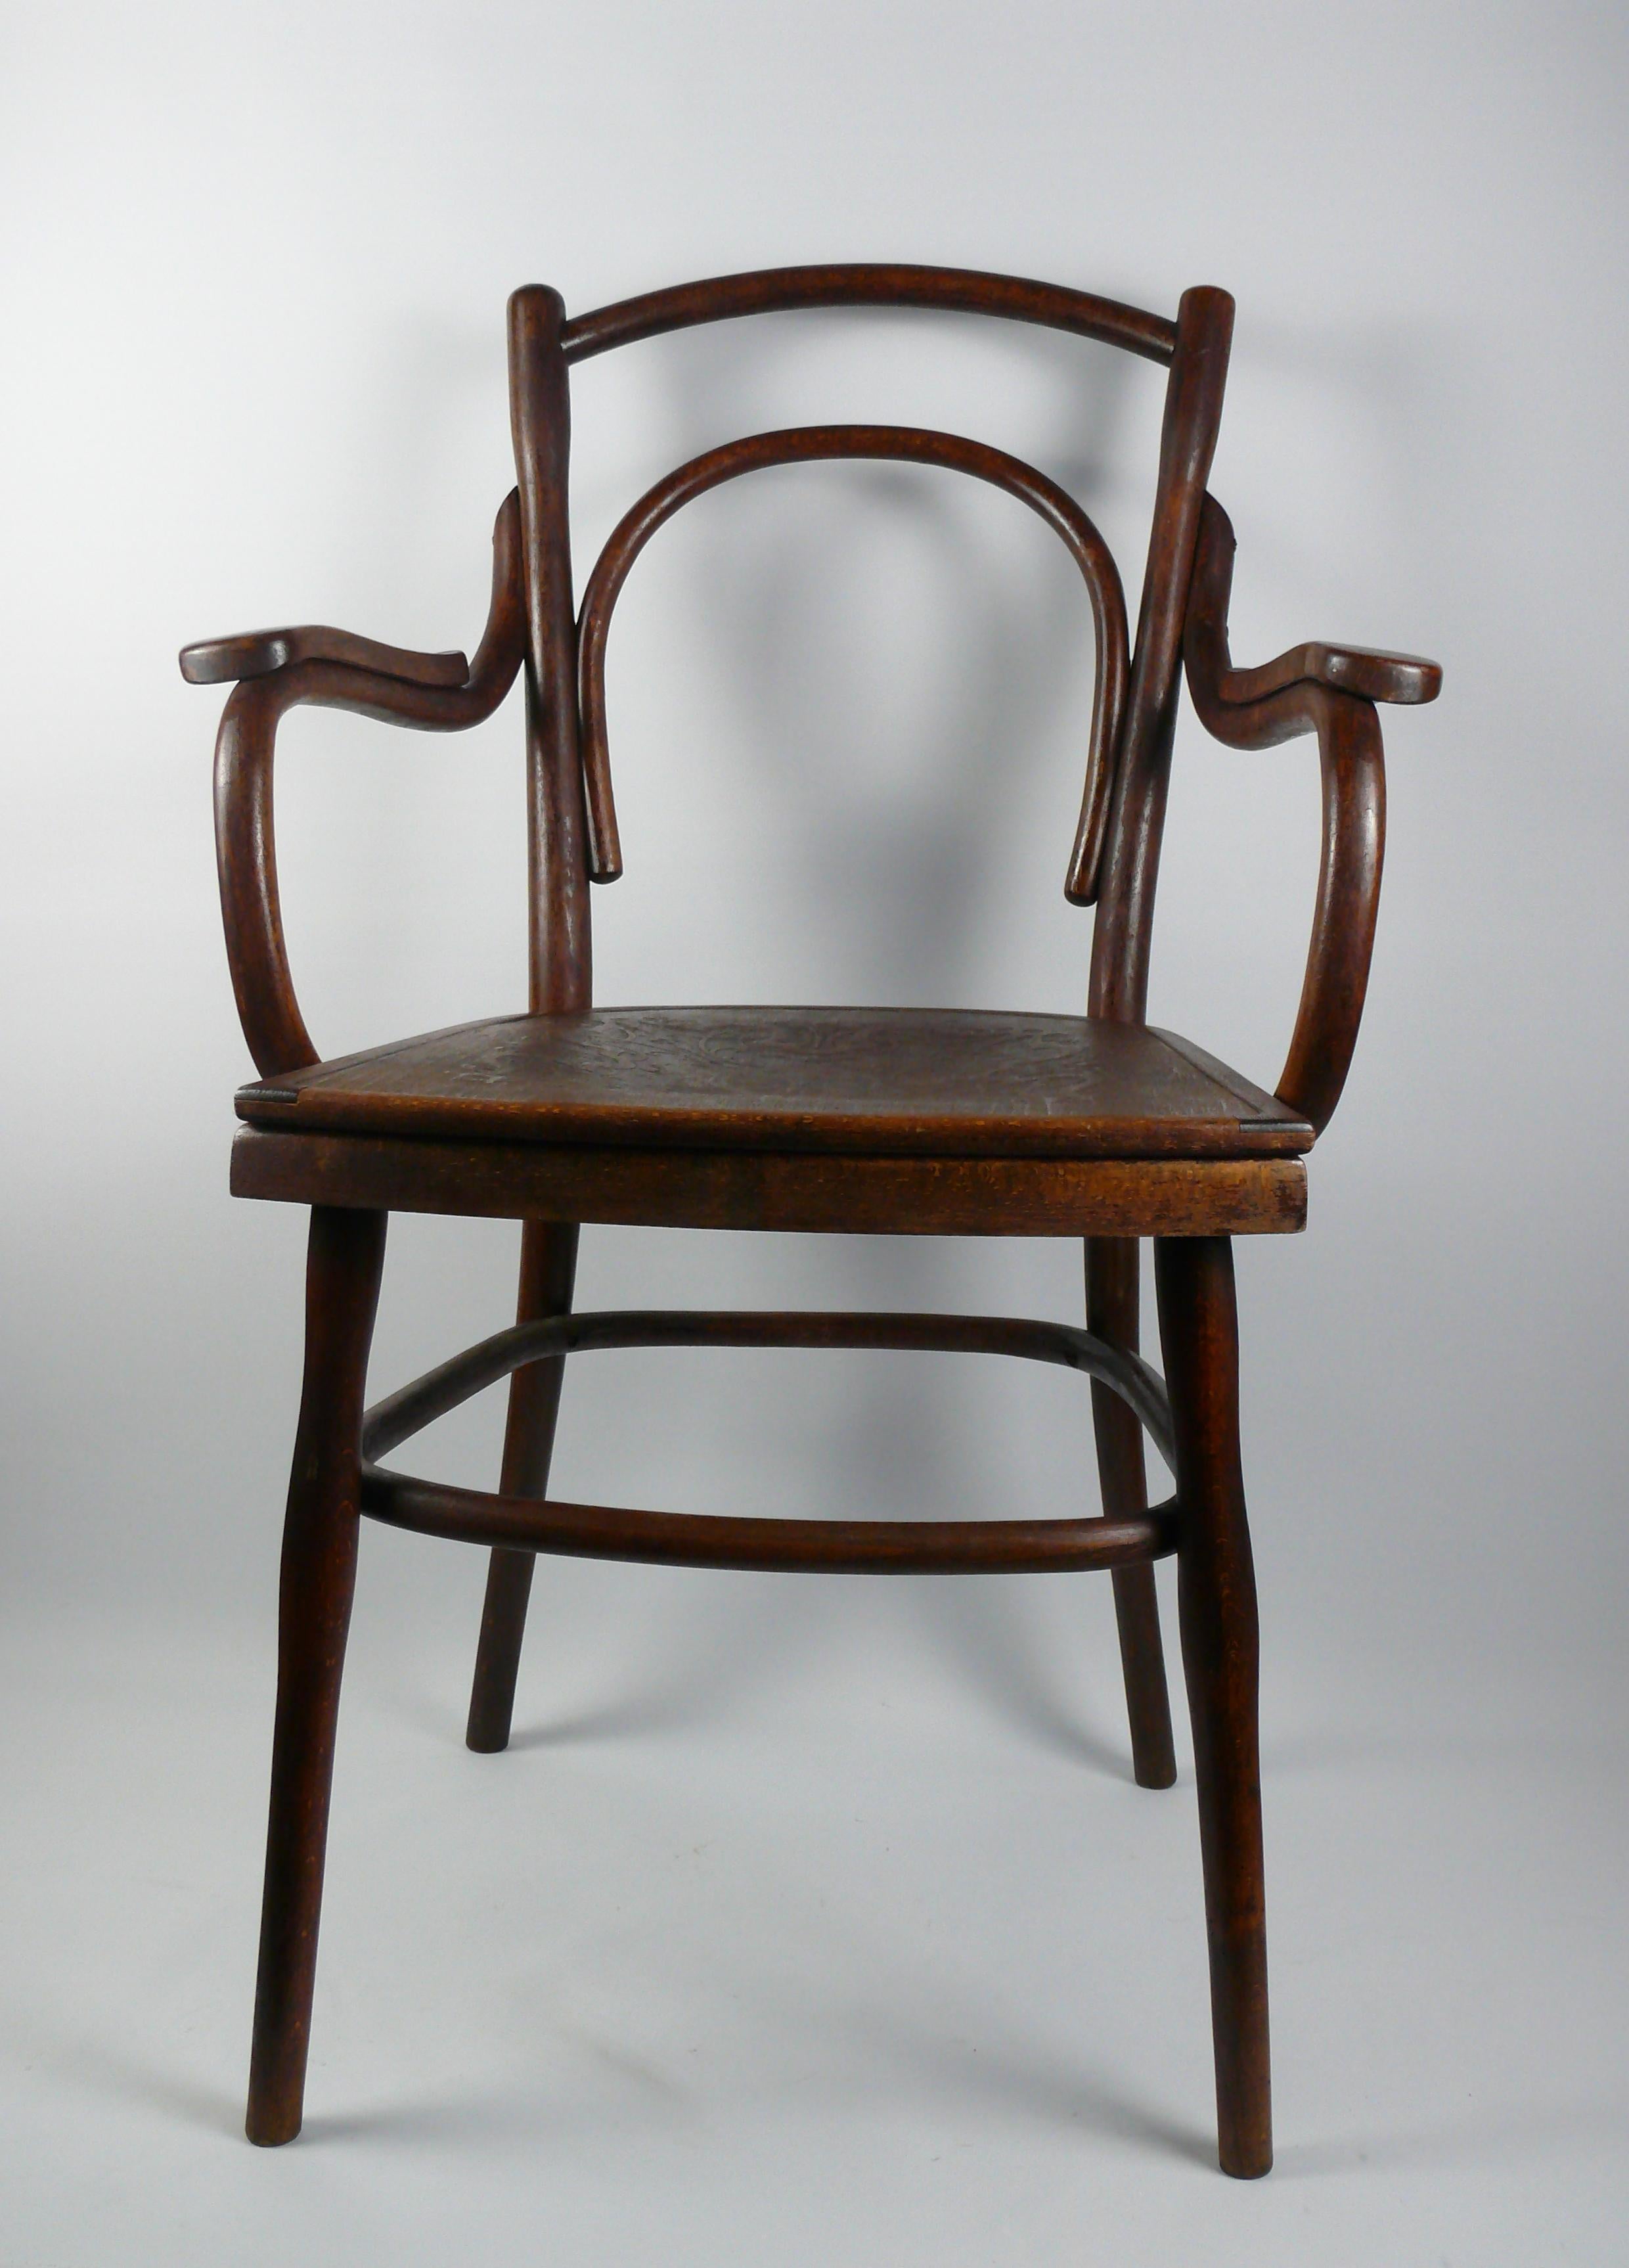 Antique bentwood armchair, late 19th or early 20th century - without marking, corresponds to Thonet chair no. 114, see photo.
The chair is made of beech wood, screwed together and provided with a bentwood ring for stabilization. The seat is made of